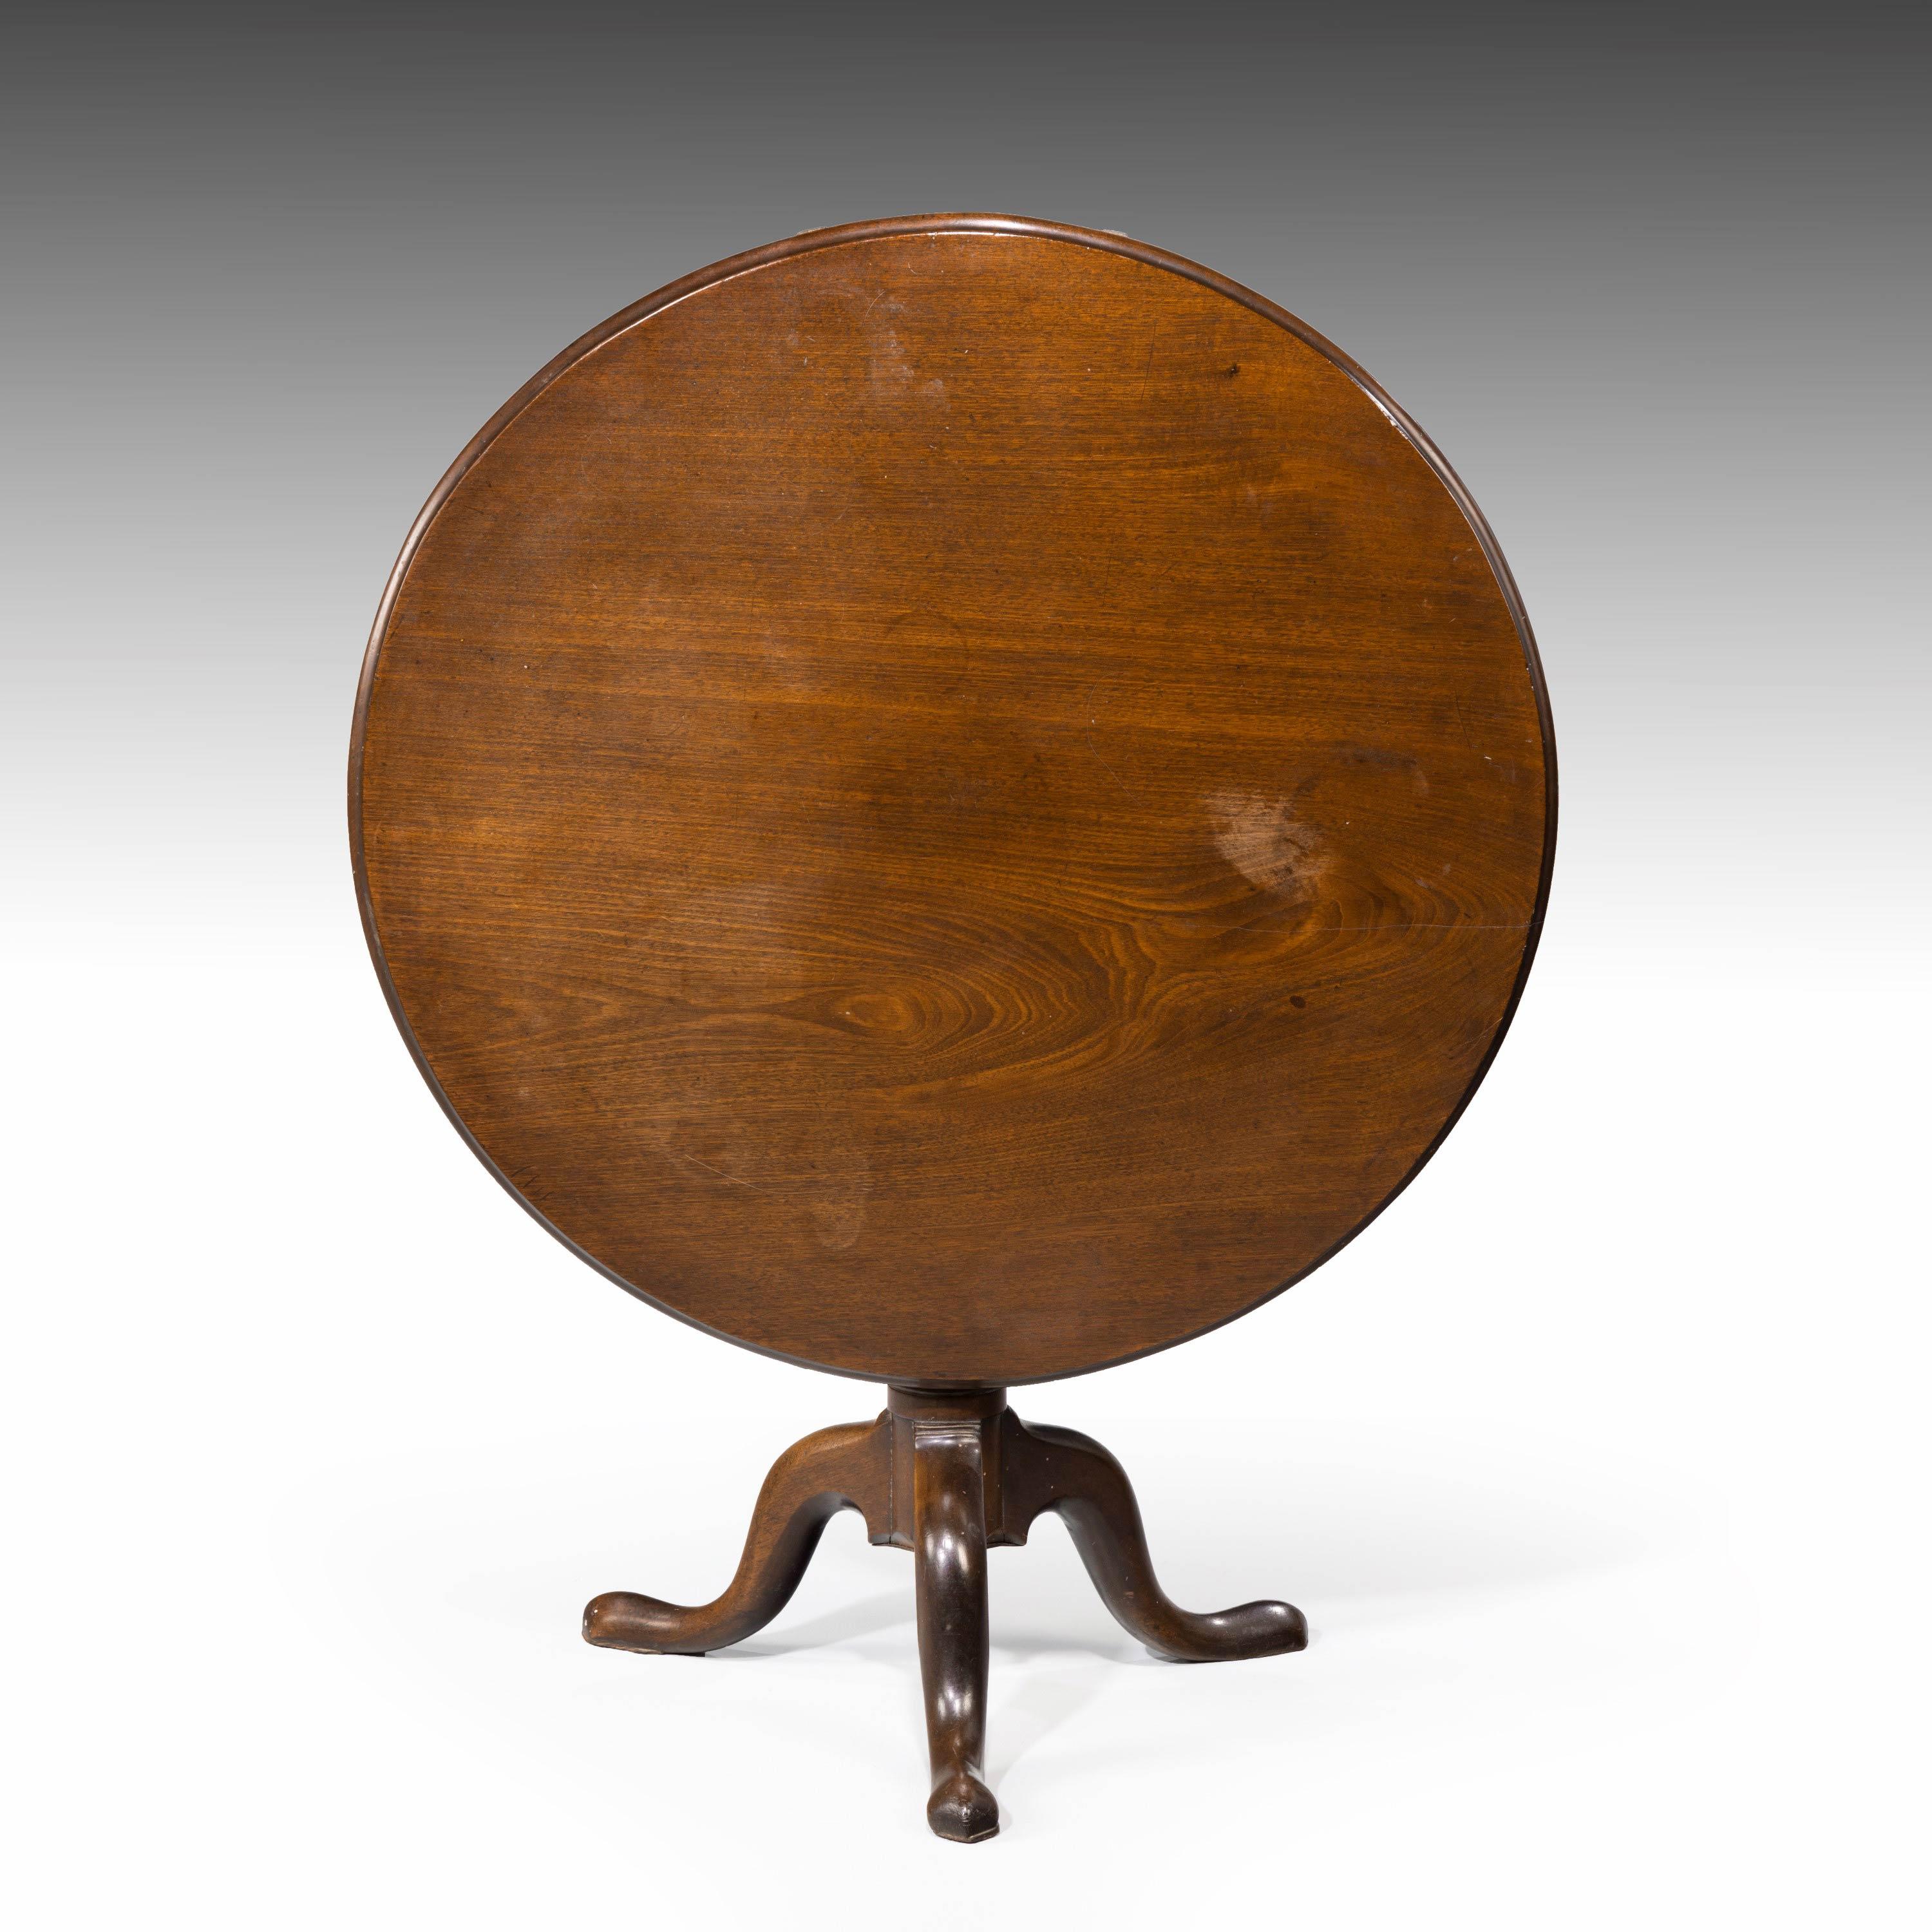 A George III period mahogany tilt table of substantial size. The one piece top beautifully figured and well patinated. On a spiralled turned pod over three cabriole supports.